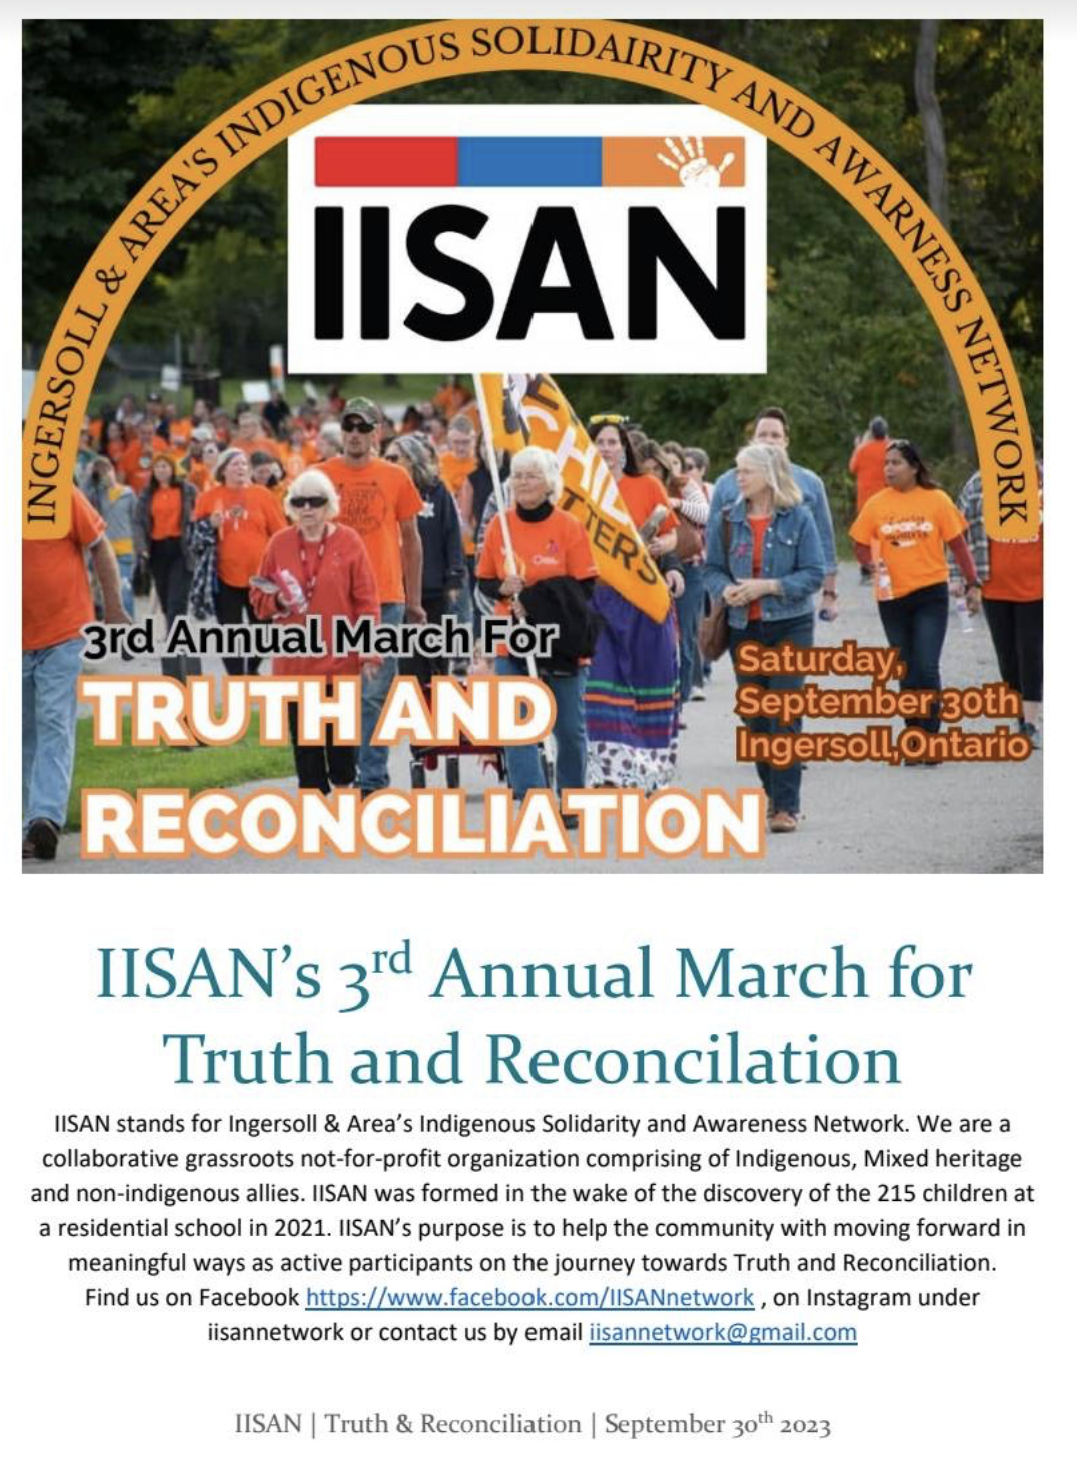 Promoting Truth And Reconciliation